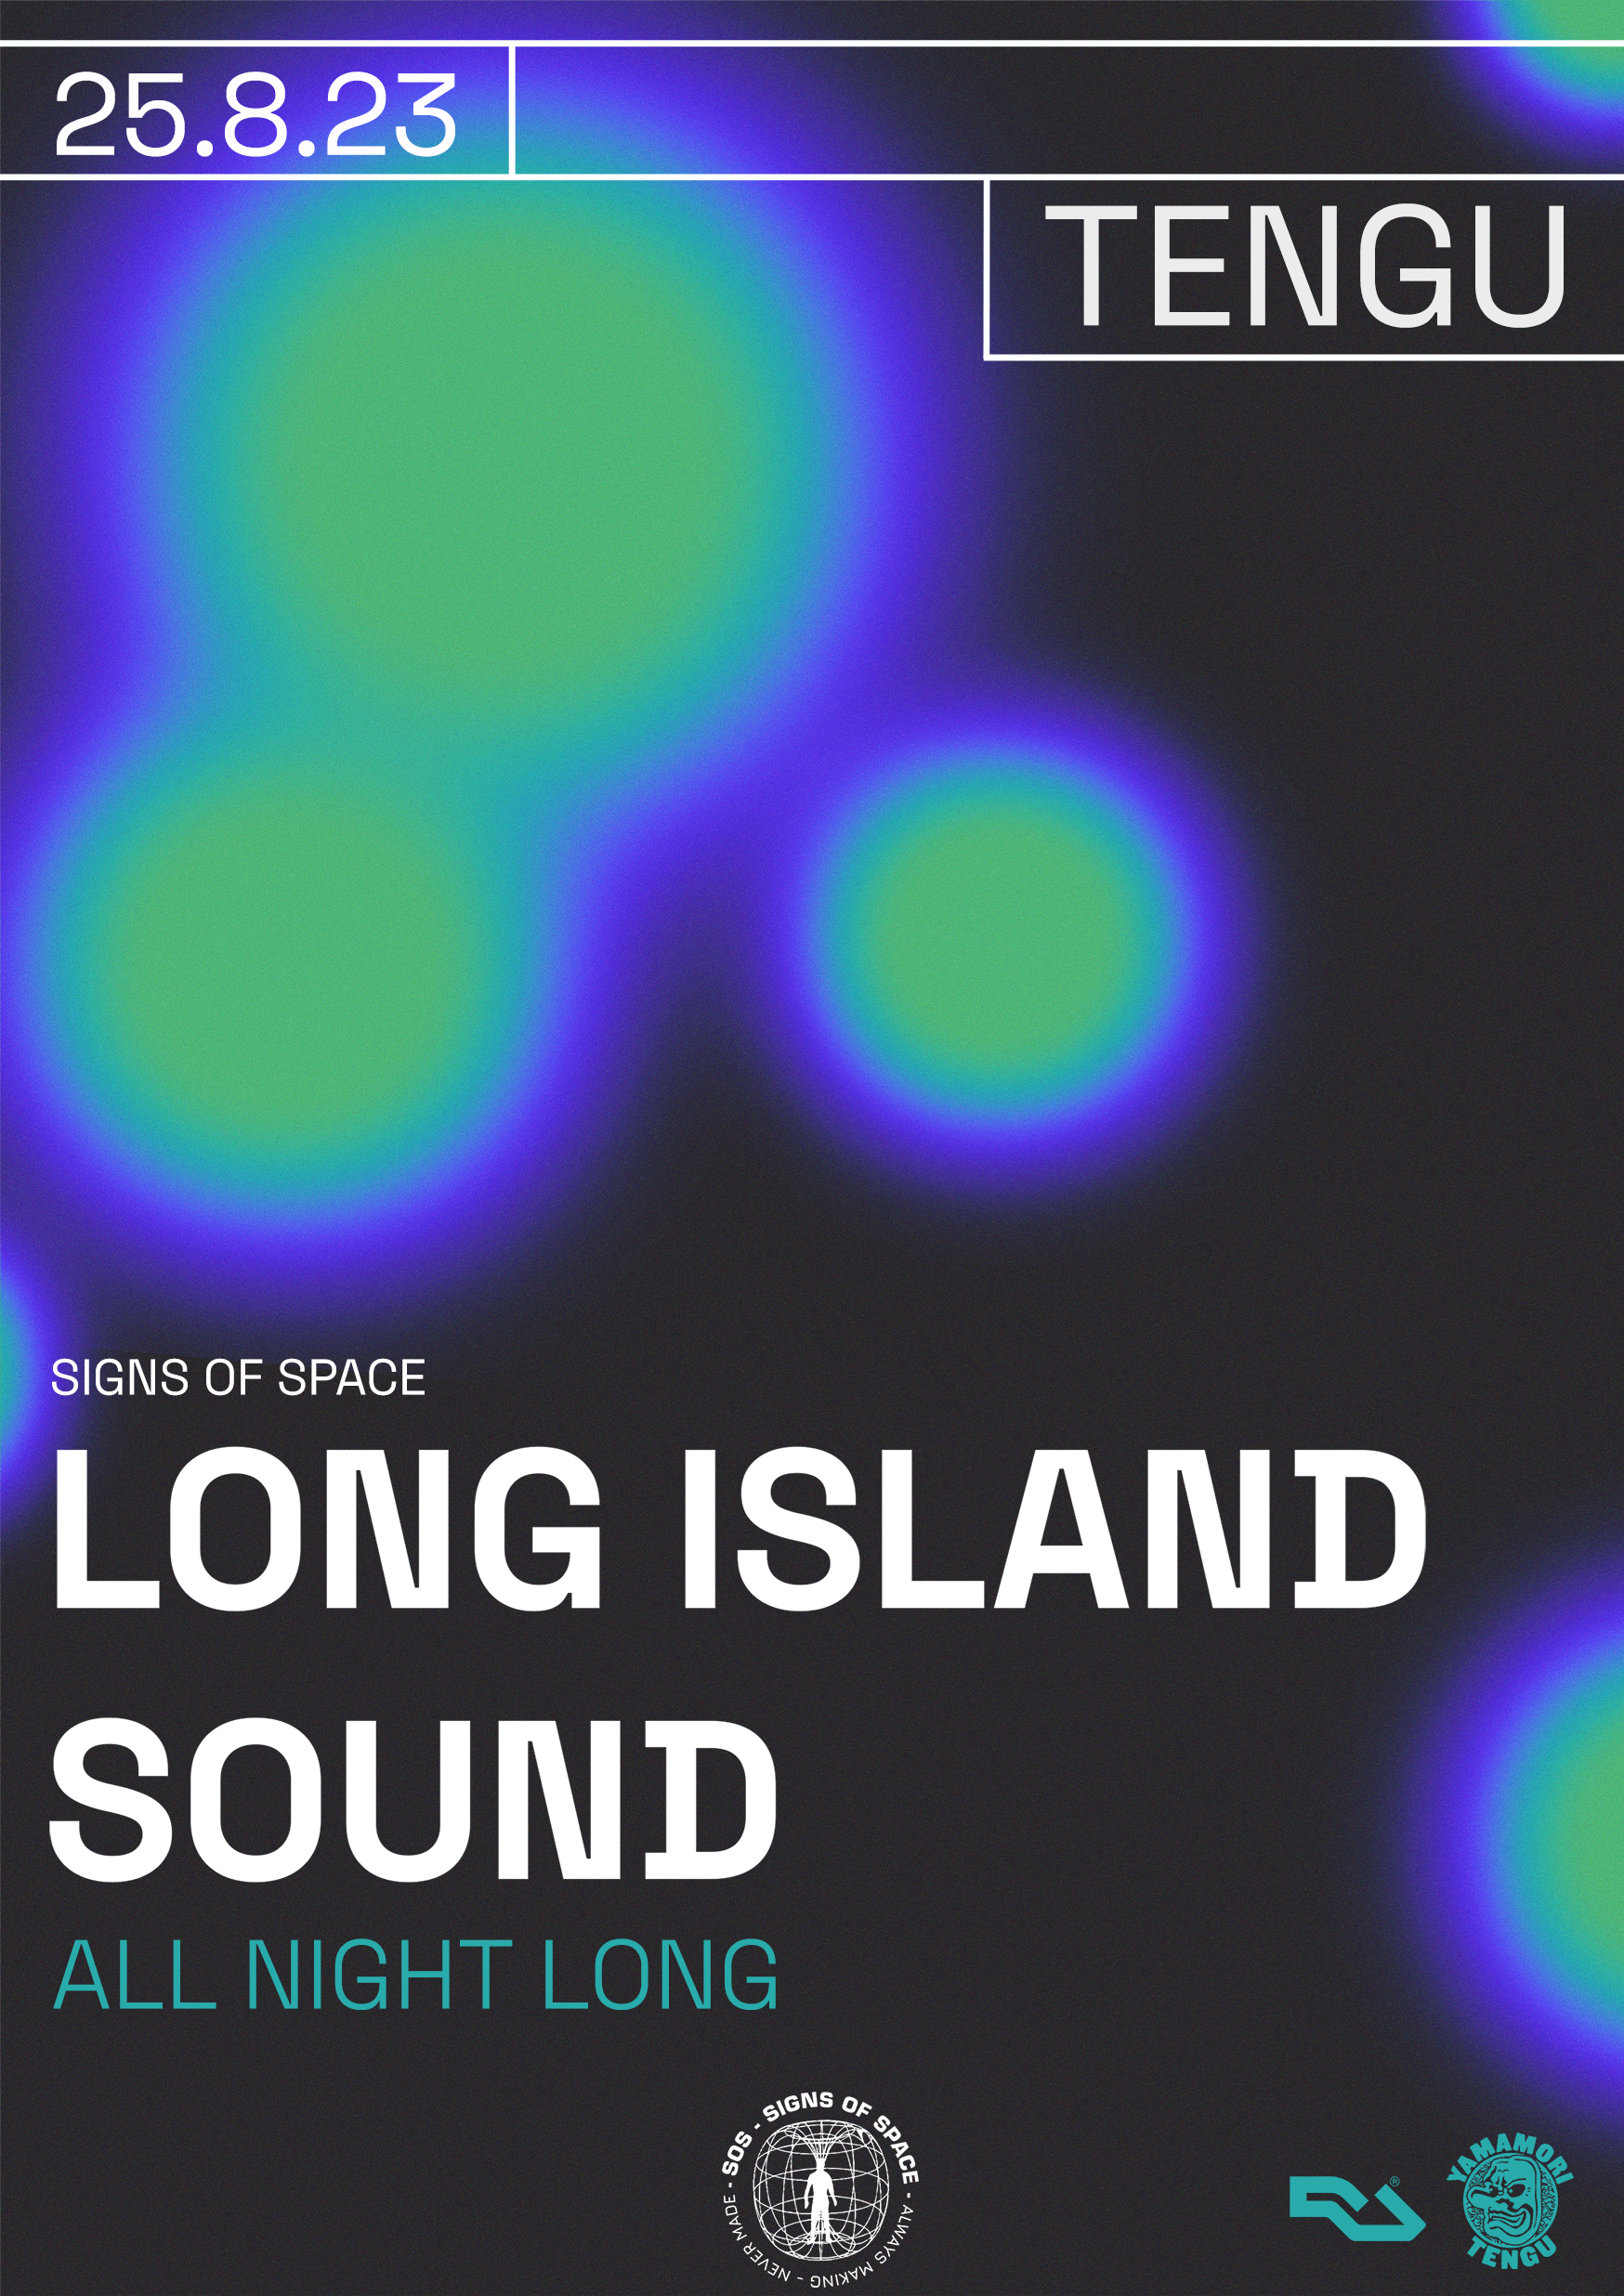 Signs of Space presents: Long Island Sound - Página frontal